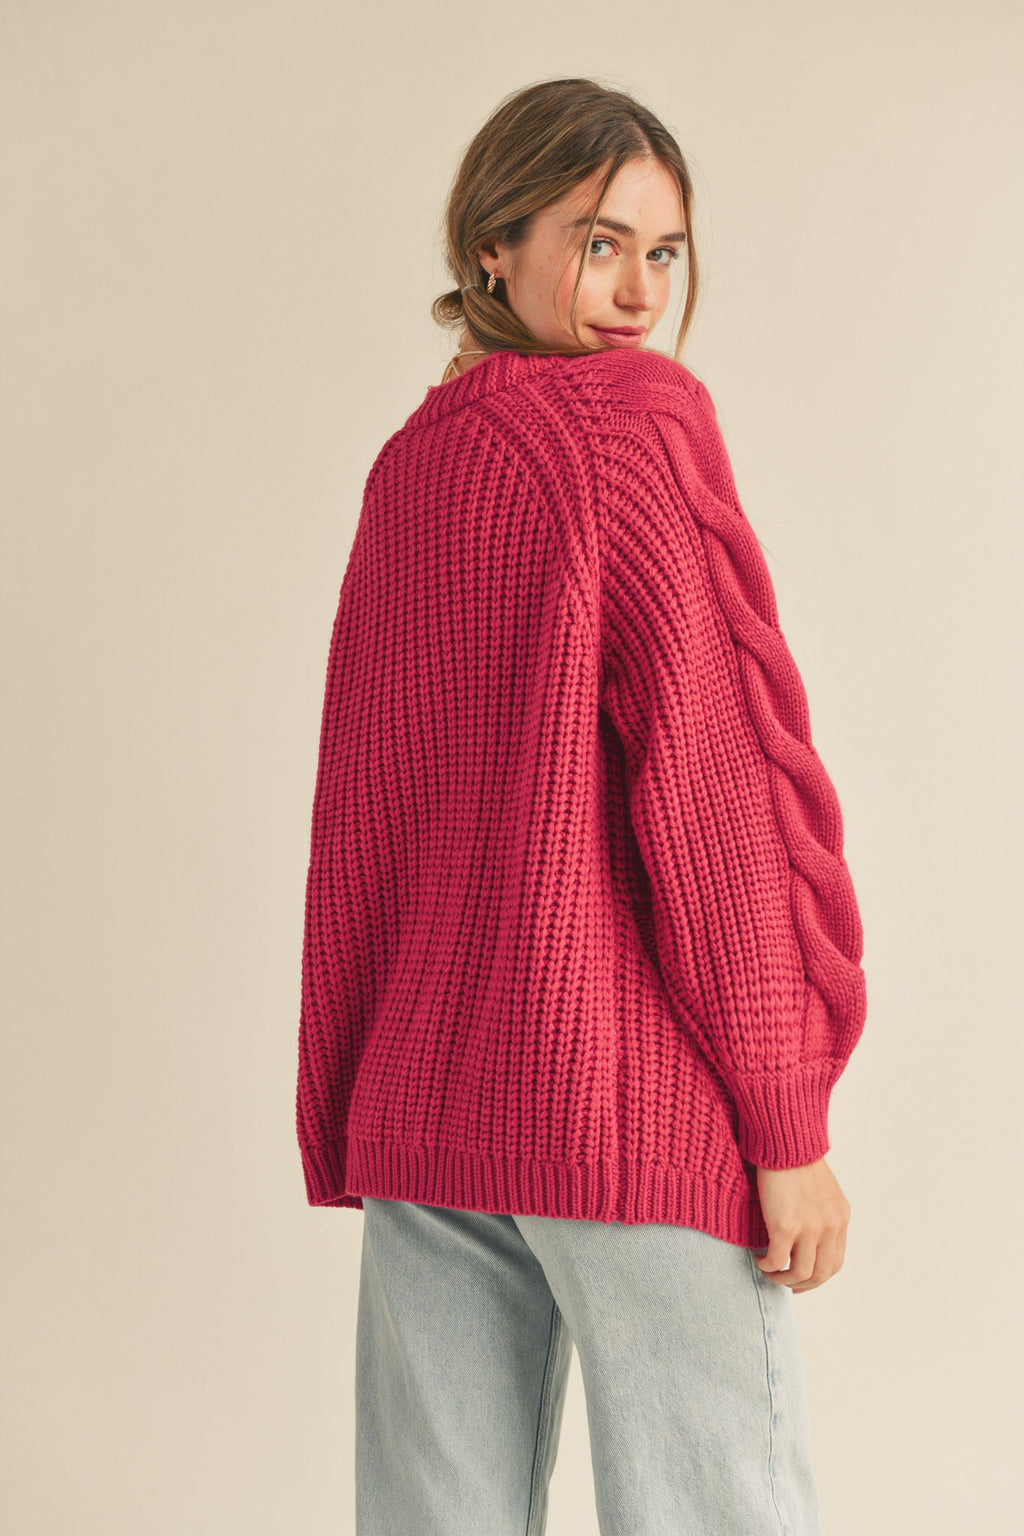 Open Front Cable Knit Cardigan- Raspberry Cream